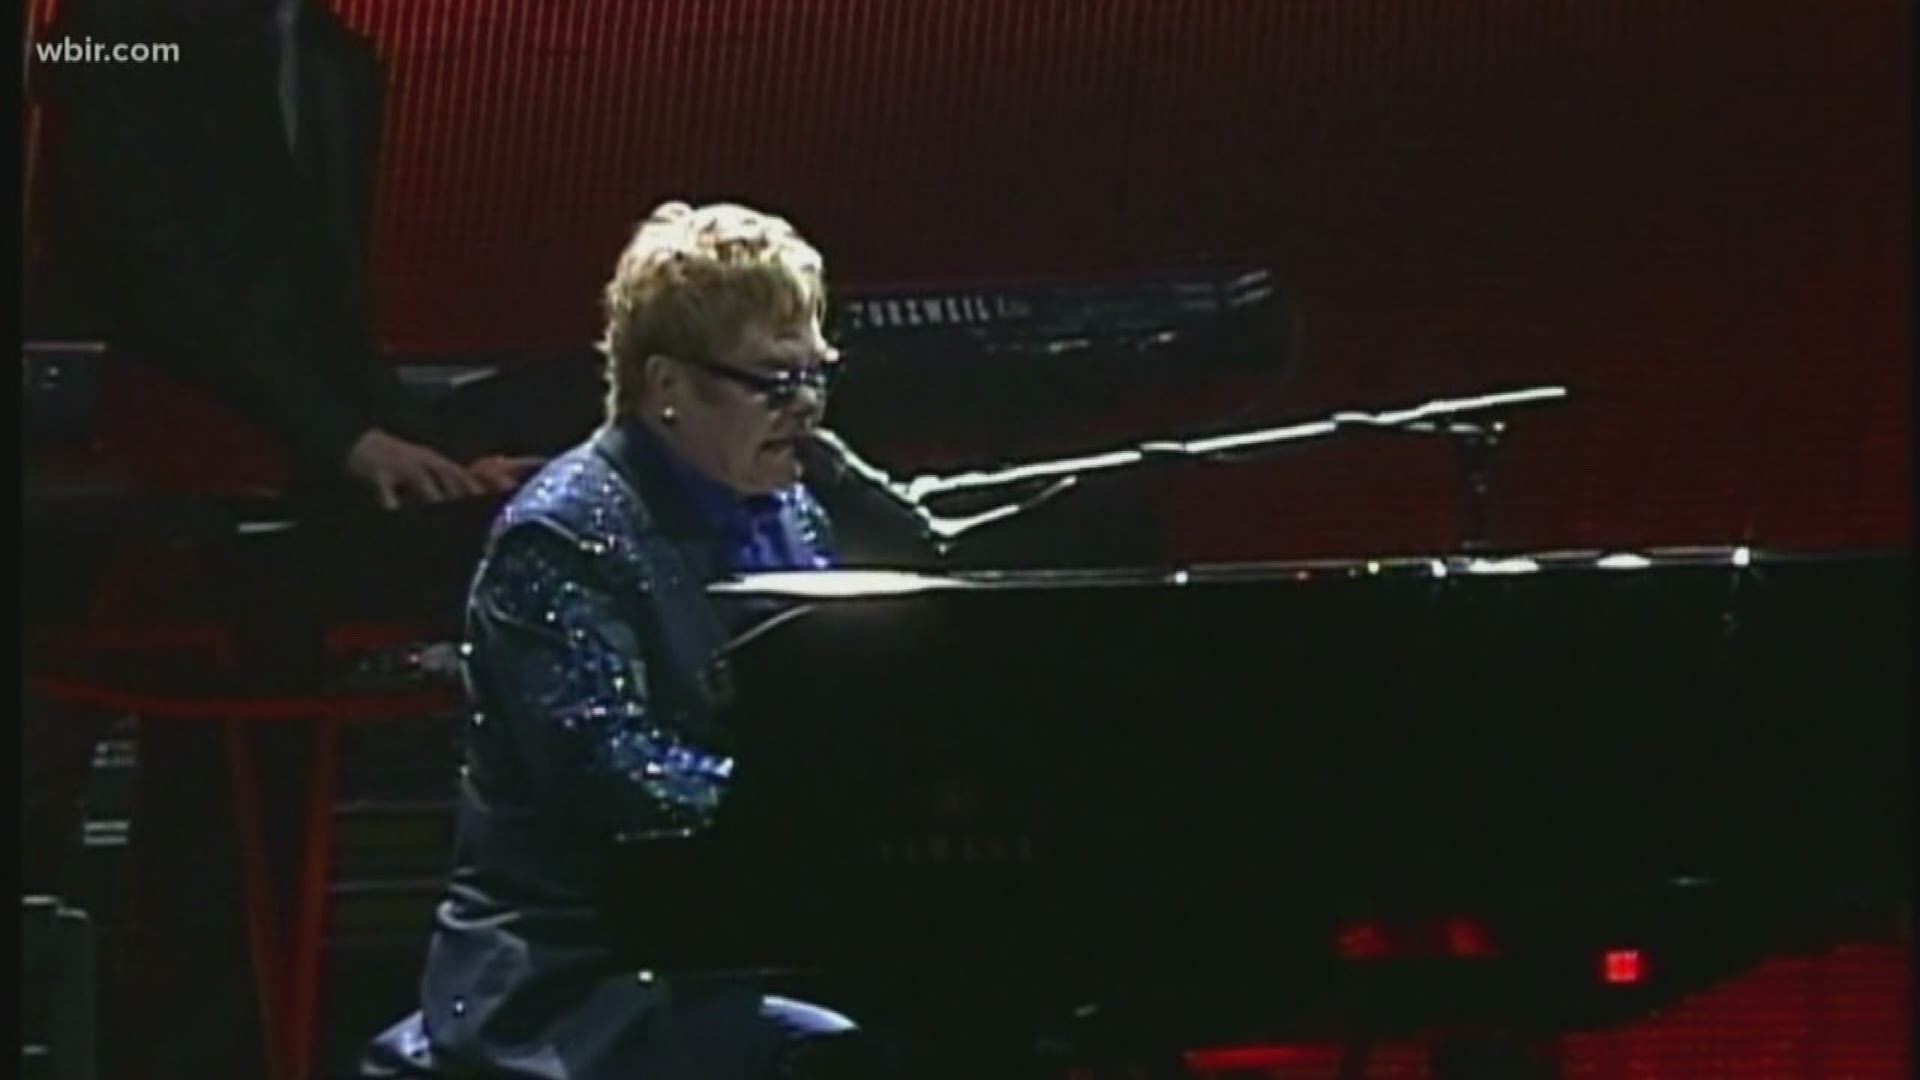 Elton John is scheduled to perform at Thompson Boling Arena on June 6, 2020.